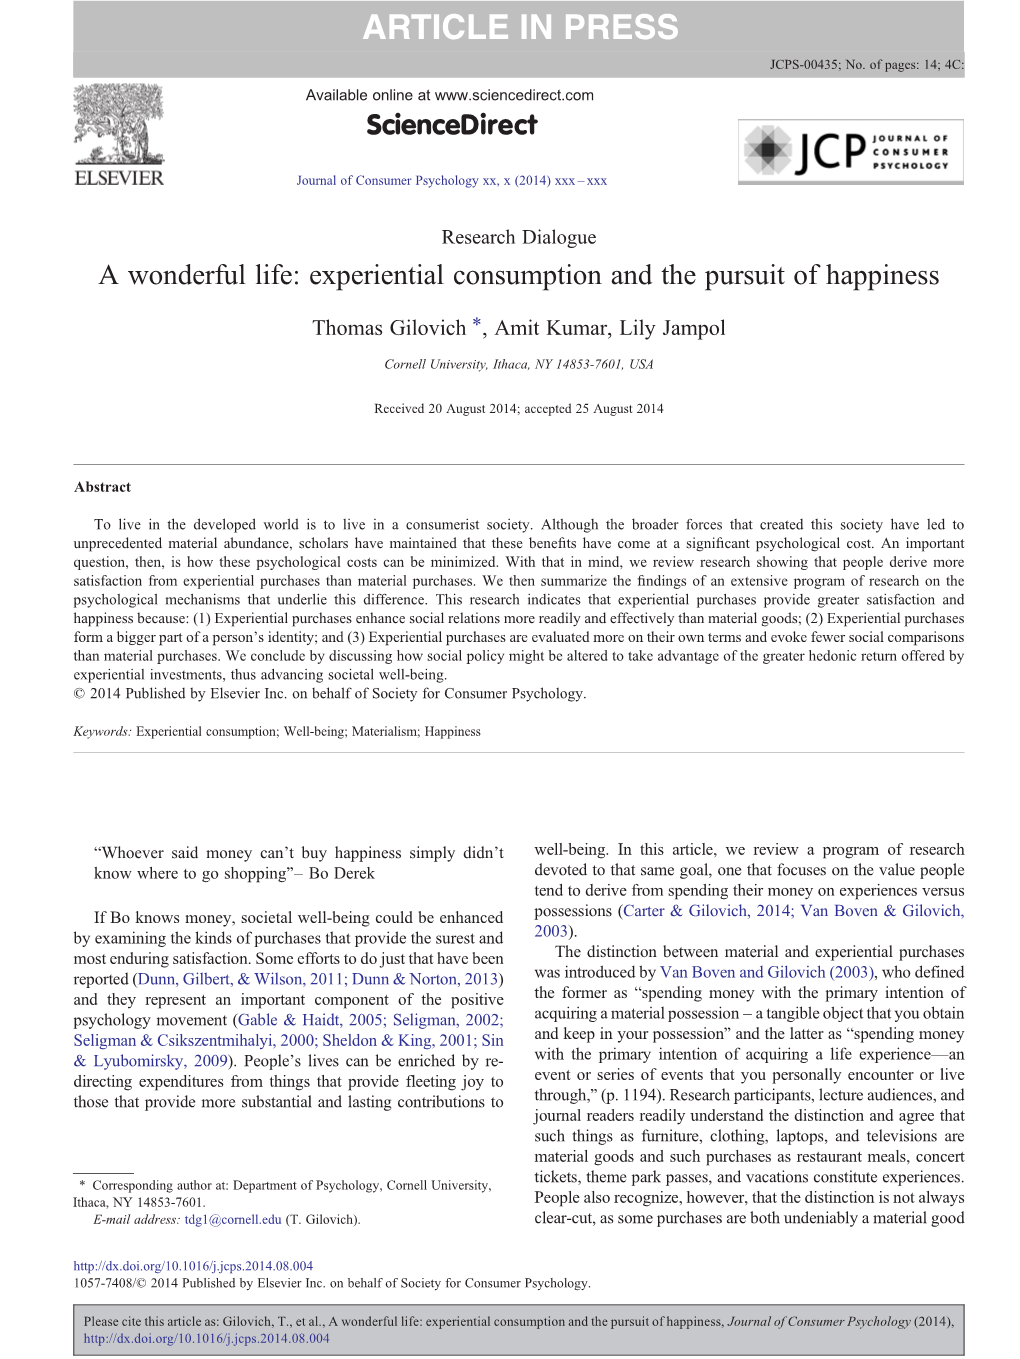 A Wonderful Life: Experiential Consumption and the Pursuit of Happiness ⁎ Thomas Gilovich , Amit Kumar, Lily Jampol